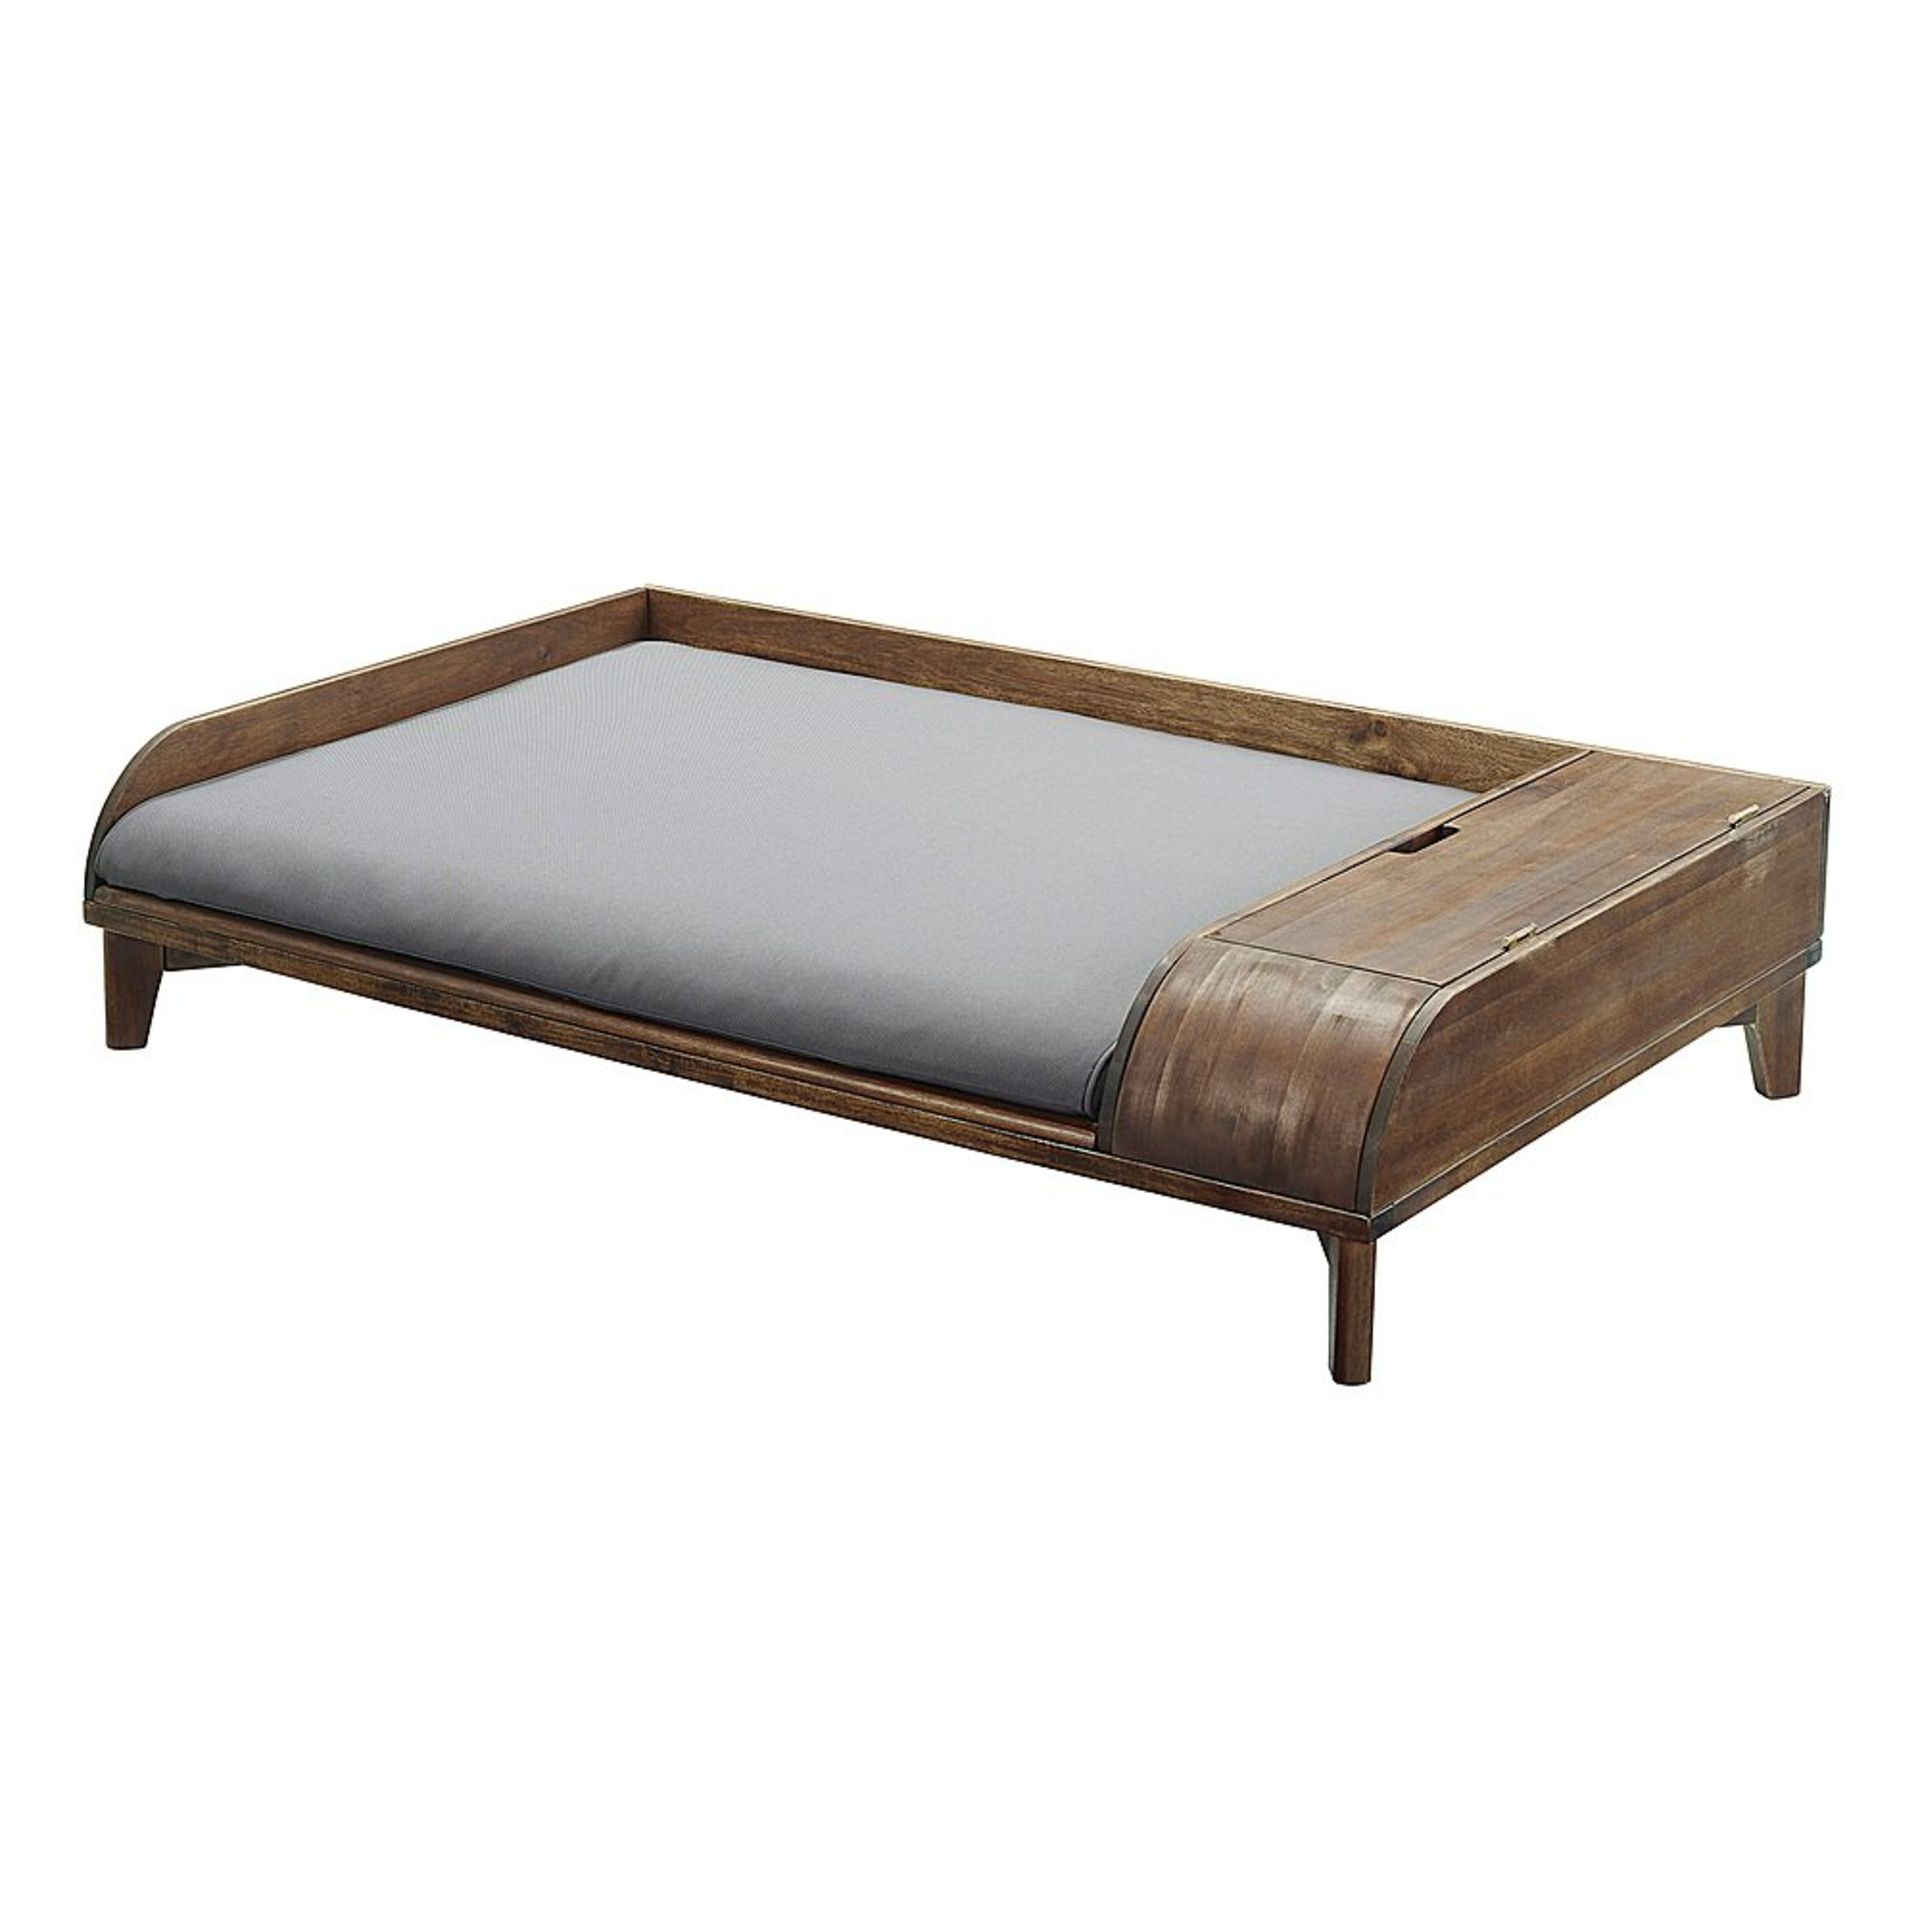 SOLID WOOD STORAGE PED BED WITH CUSHION IN DARK BROWN/GREY - RRP £245 - Image 3 of 7